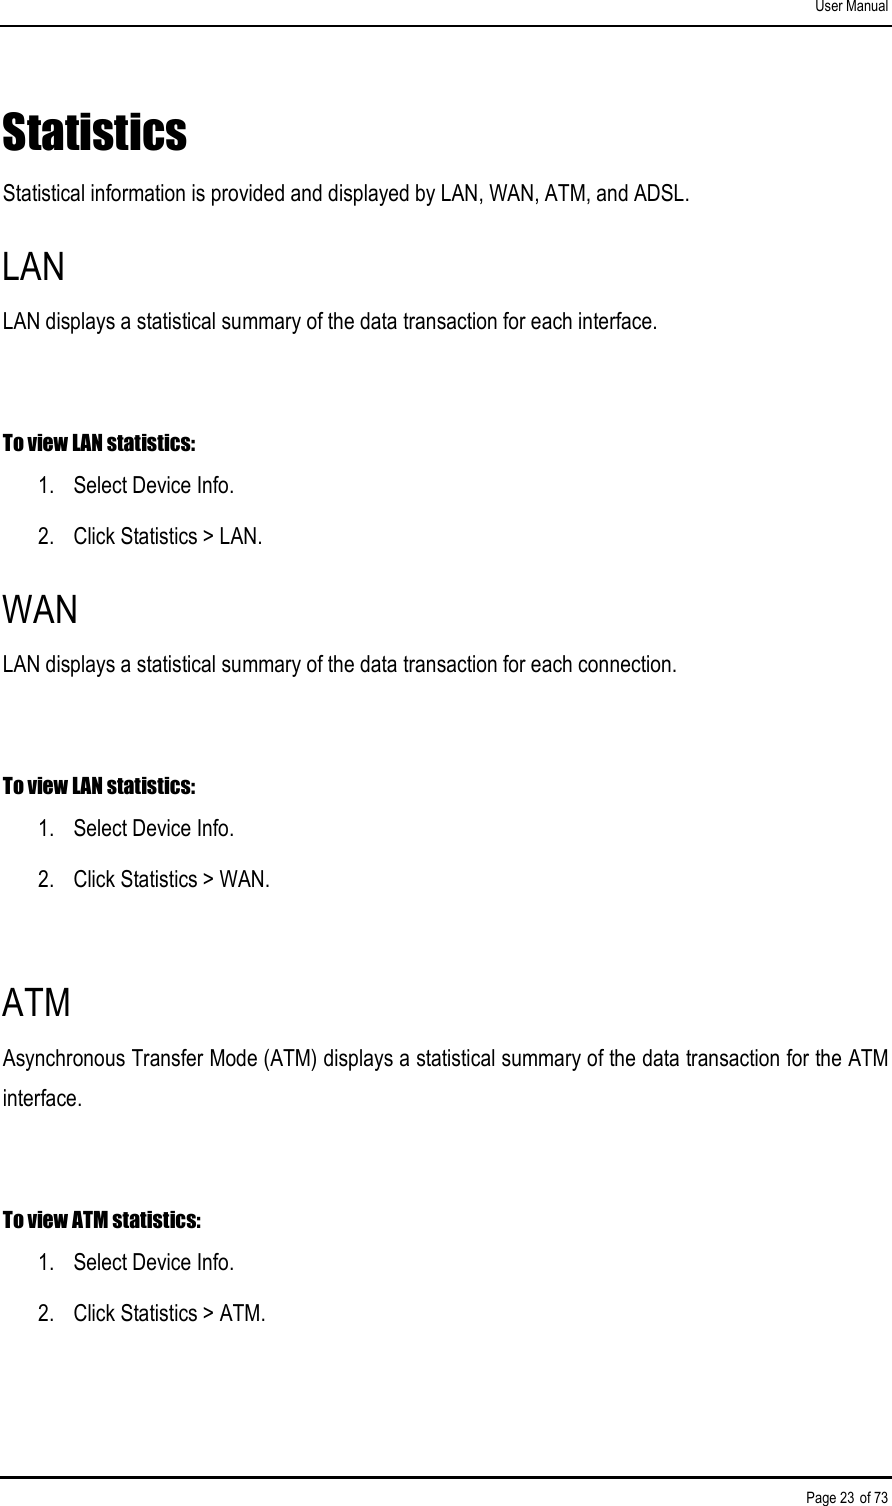 User Manual Page 23 of 73 Statistics Statistical information is provided and displayed by LAN, WAN, ATM, and ADSL. LAN LAN displays a statistical summary of the data transaction for each interface.  To view LAN statistics: 1.  Select Device Info. 2.  Click Statistics &gt; LAN. WAN LAN displays a statistical summary of the data transaction for each connection.  To view LAN statistics: 1.  Select Device Info. 2.  Click Statistics &gt; WAN.  ATM Asynchronous Transfer Mode (ATM) displays a statistical summary of the data transaction for the ATM interface.  To view ATM statistics: 1.  Select Device Info. 2.  Click Statistics &gt; ATM. 